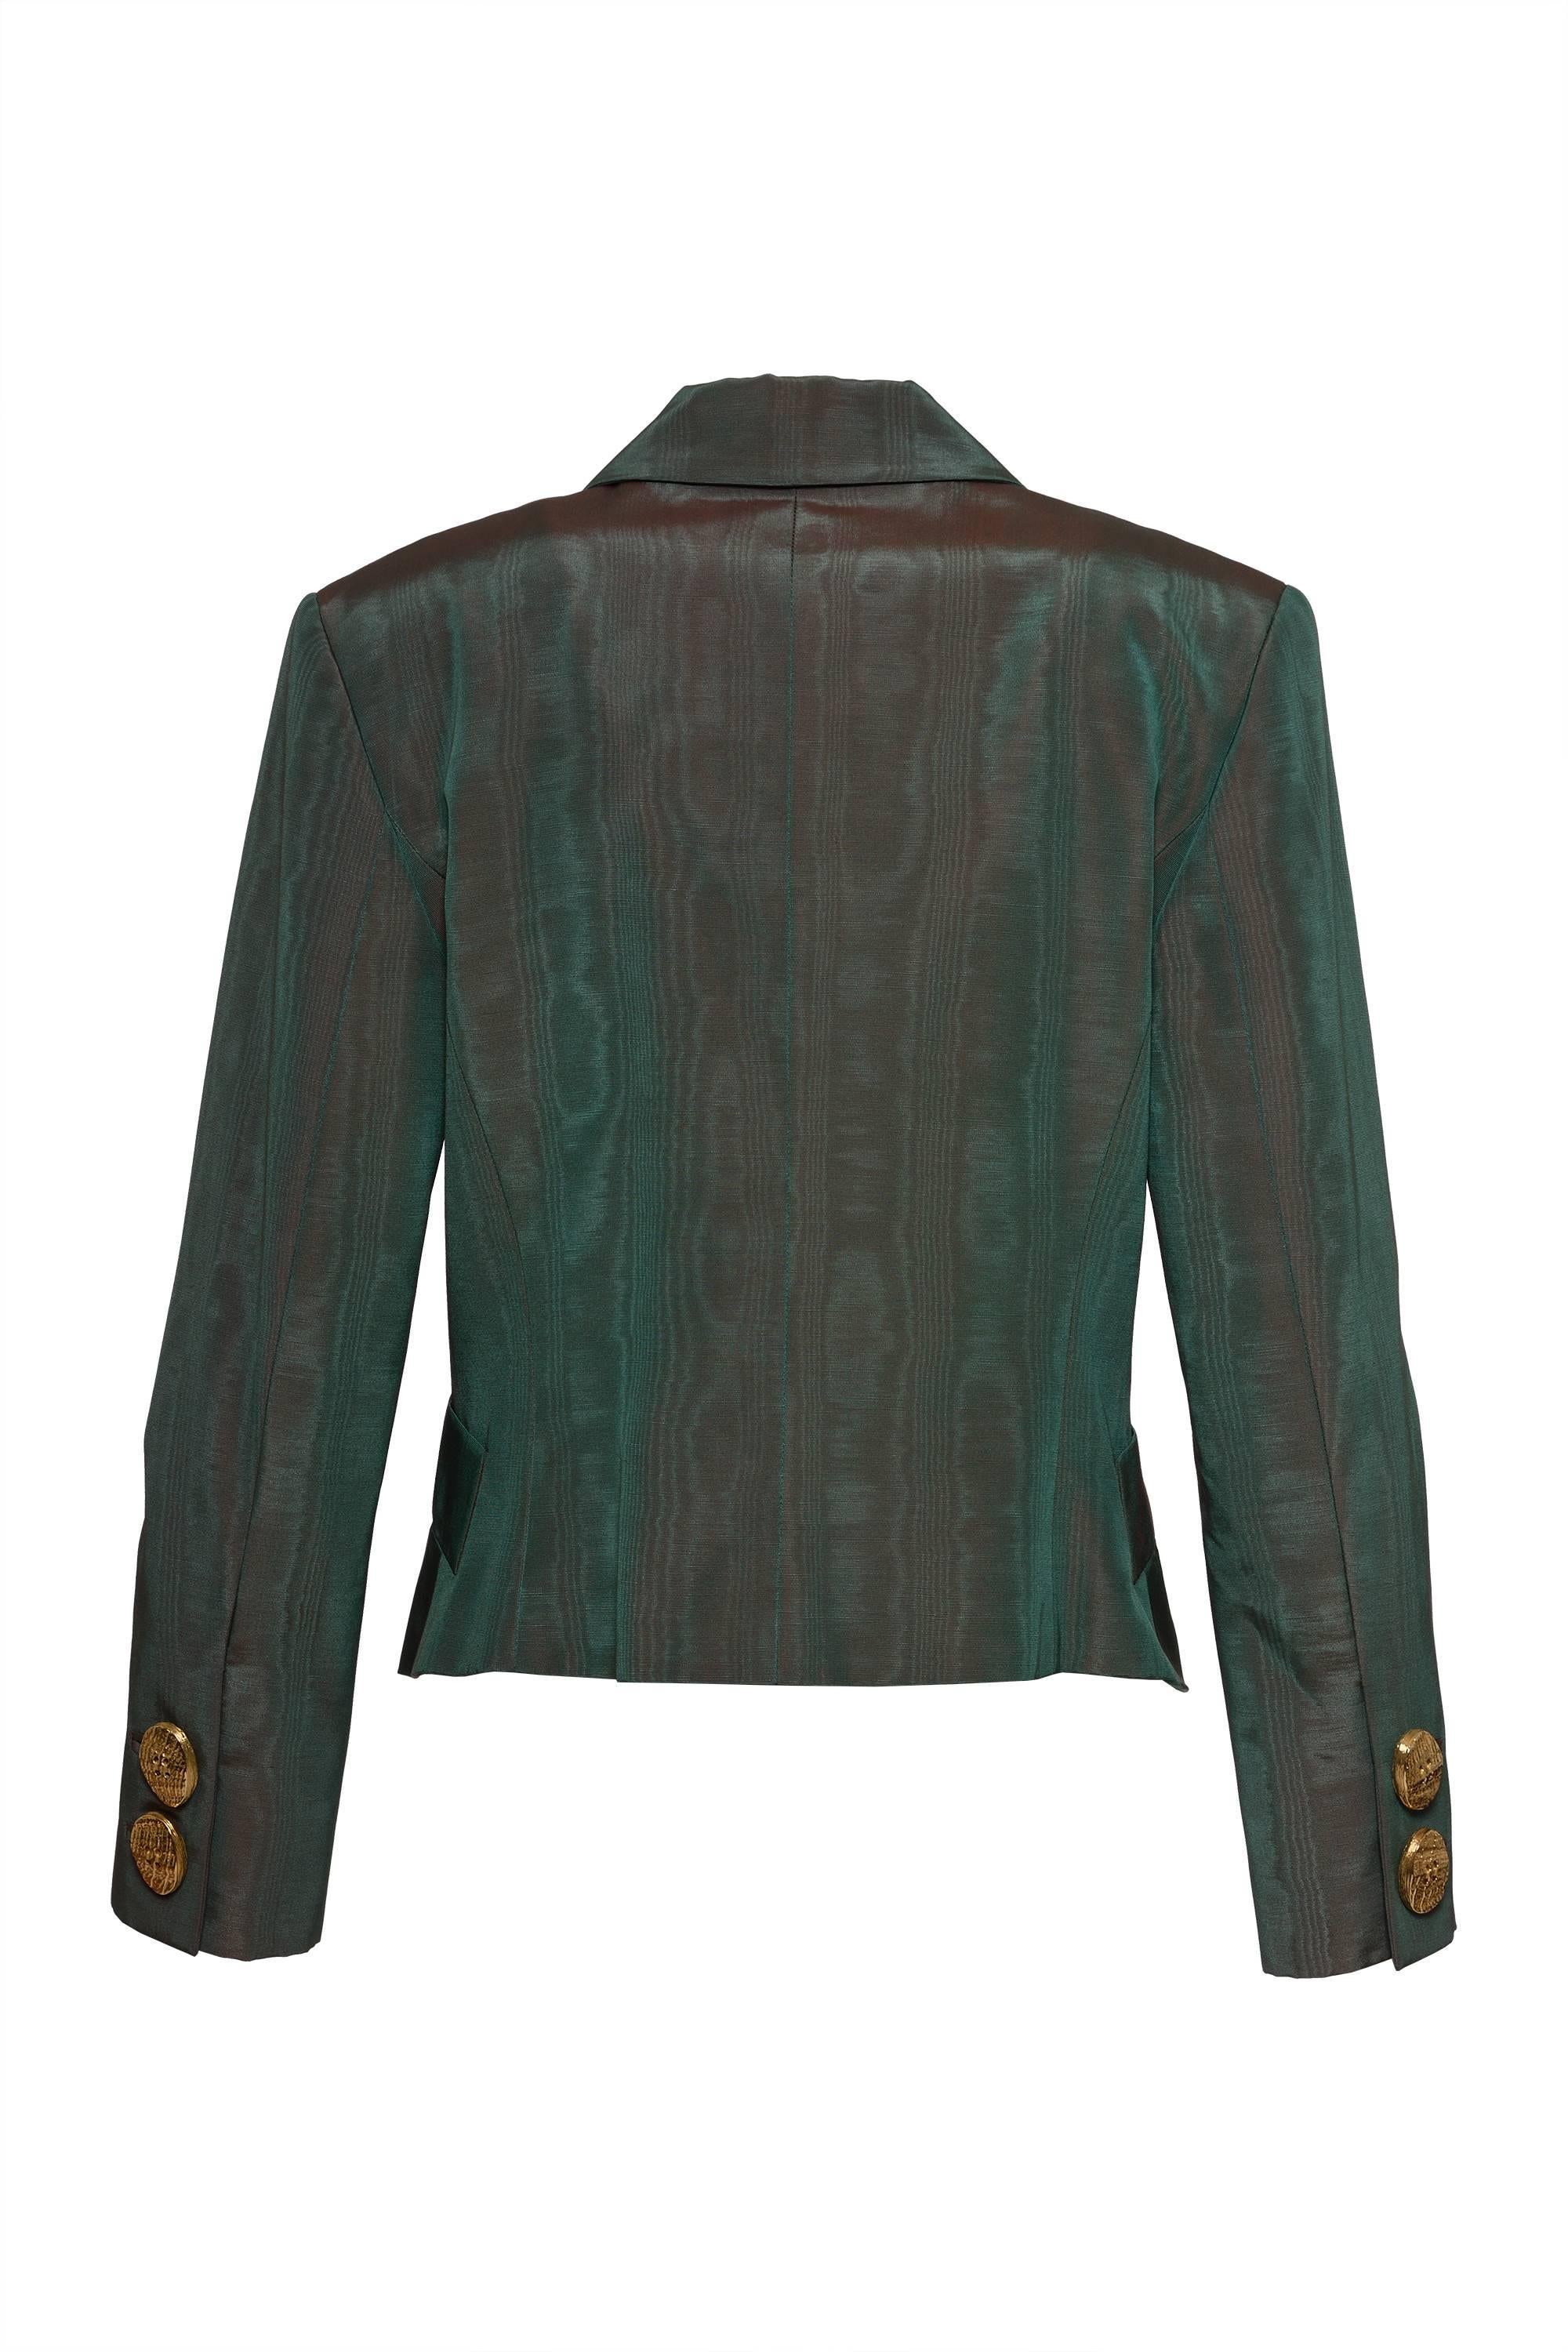 This gorgeous 1980s Gianfranco Ferré jacket is in green iridescent cotton fabric. It has two frontal pockets, metal gold botton in sleeves and one cufflinks closure in gold metal. It's fully lined. 

Excellent Vintage Condition 

Label: Gianfranco